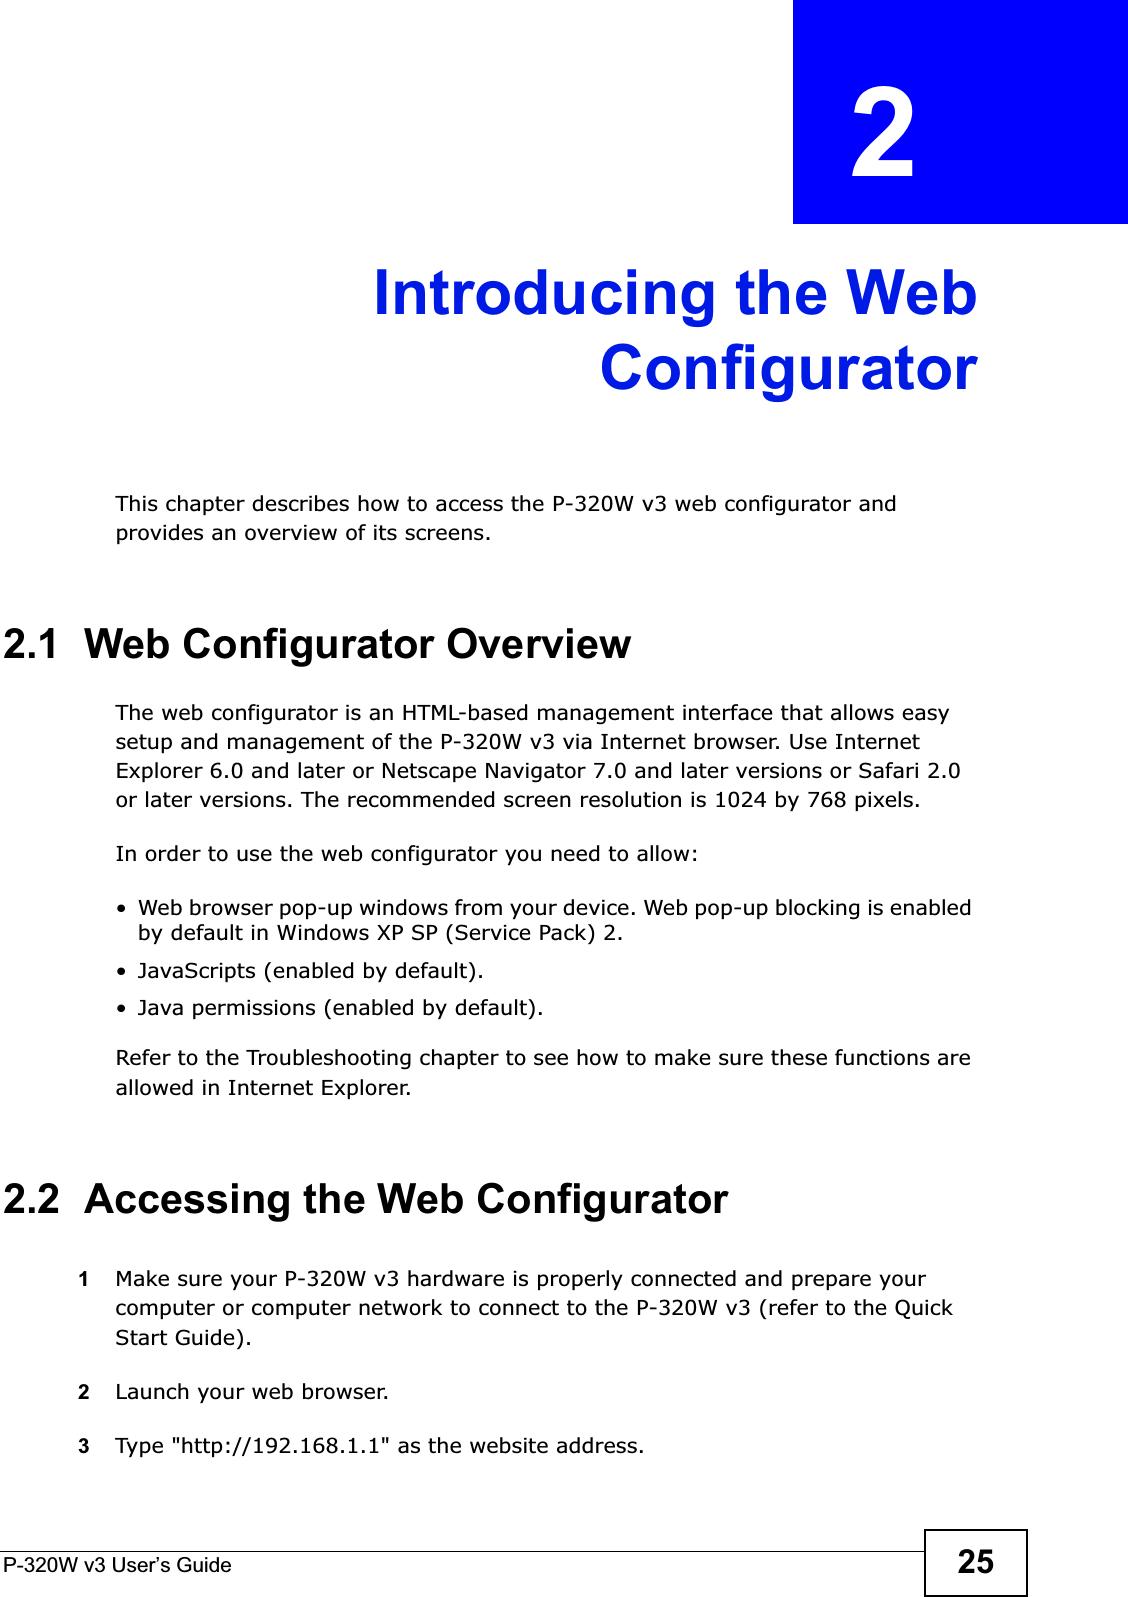 P-320W v3 User’s Guide 25CHAPTER  2 Introducing the WebConfiguratorThis chapter describes how to access the P-320W v3 web configurator and provides an overview of its screens.2.1  Web Configurator OverviewThe web configurator is an HTML-based management interface that allows easy setup and management of the P-320W v3 via Internet browser. Use Internet Explorer 6.0 and later or Netscape Navigator 7.0 and later versions or Safari 2.0 or later versions. The recommended screen resolution is 1024 by 768 pixels.In order to use the web configurator you need to allow:• Web browser pop-up windows from your device. Web pop-up blocking is enabled by default in Windows XP SP (Service Pack) 2.• JavaScripts (enabled by default).• Java permissions (enabled by default).Refer to the Troubleshooting chapter to see how to make sure these functions are allowed in Internet Explorer.2.2  Accessing the Web Configurator1Make sure your P-320W v3 hardware is properly connected and prepare your computer or computer network to connect to the P-320W v3 (refer to the Quick Start Guide).2Launch your web browser.3Type &quot;http://192.168.1.1&quot; as the website address.